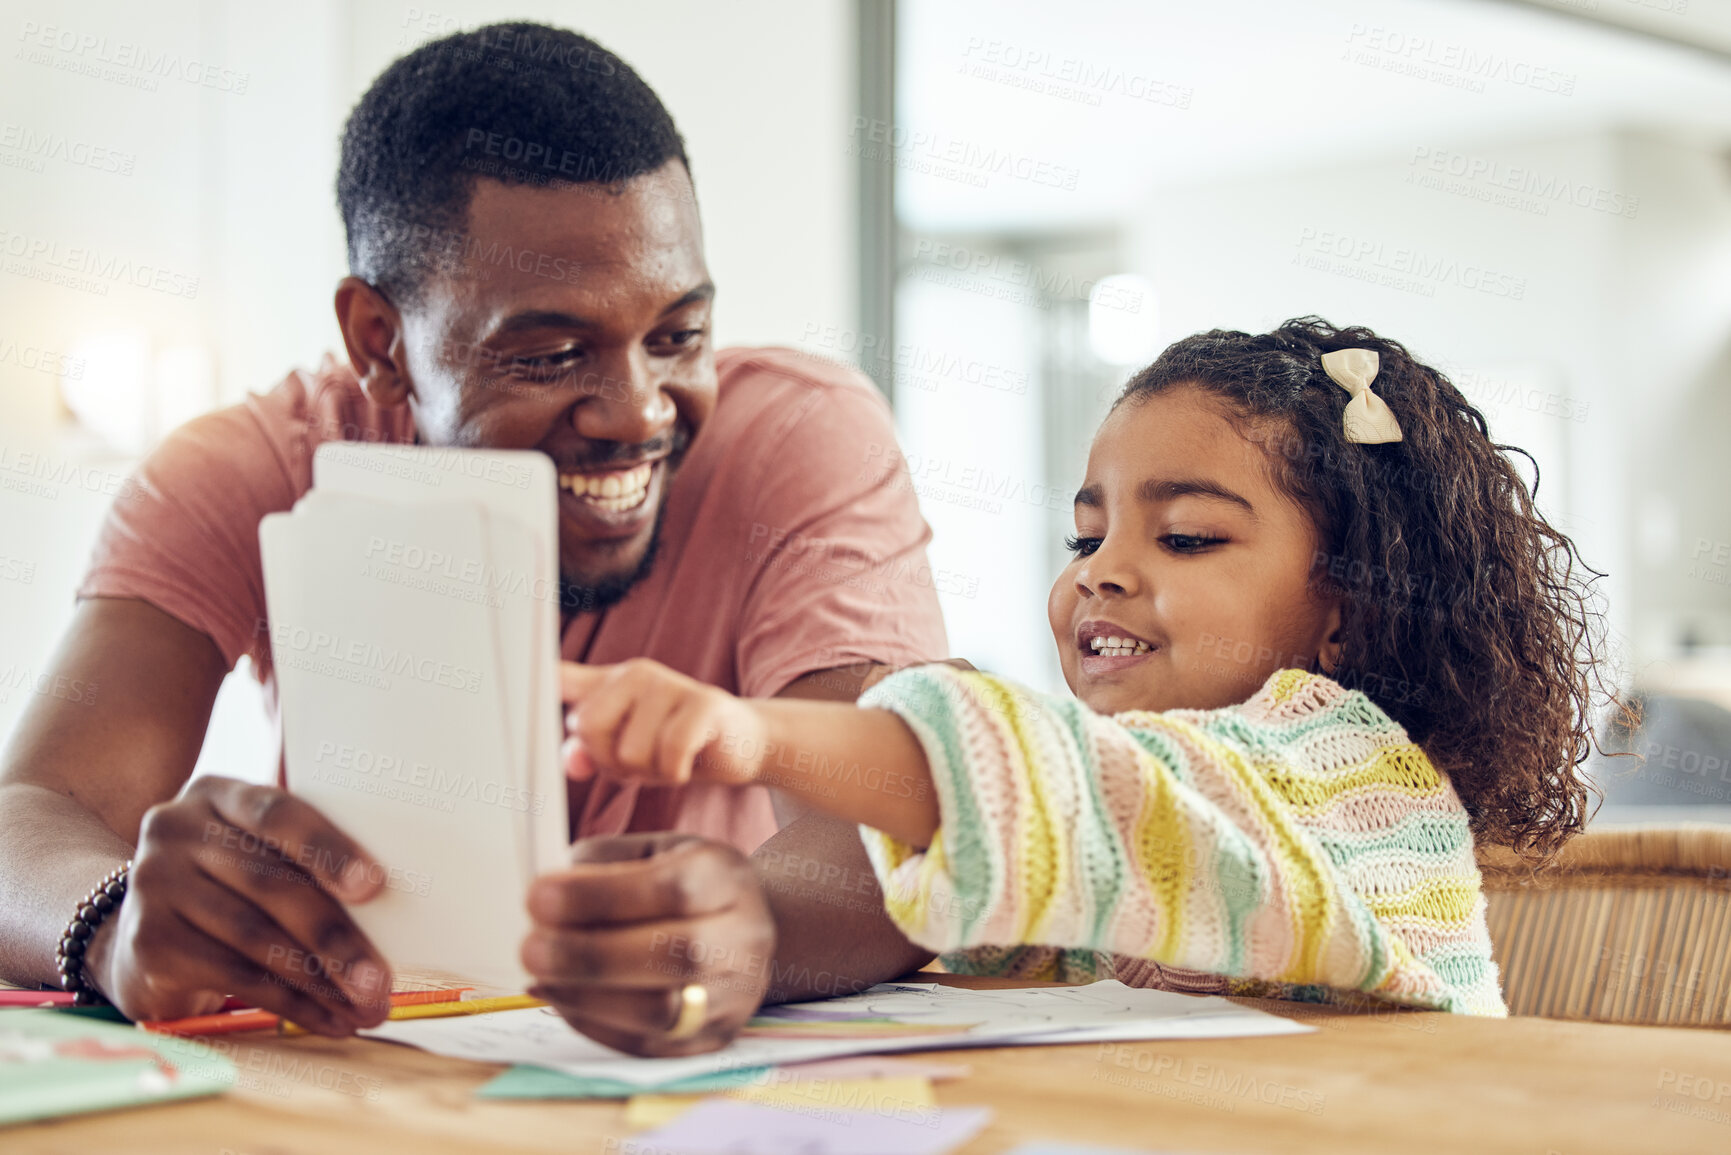 Buy stock photo Home school, learning and father helping his child with flash cards, homework or studying. Education, knowledge and African man teaching his young girl kid with reading or an academic assignment.